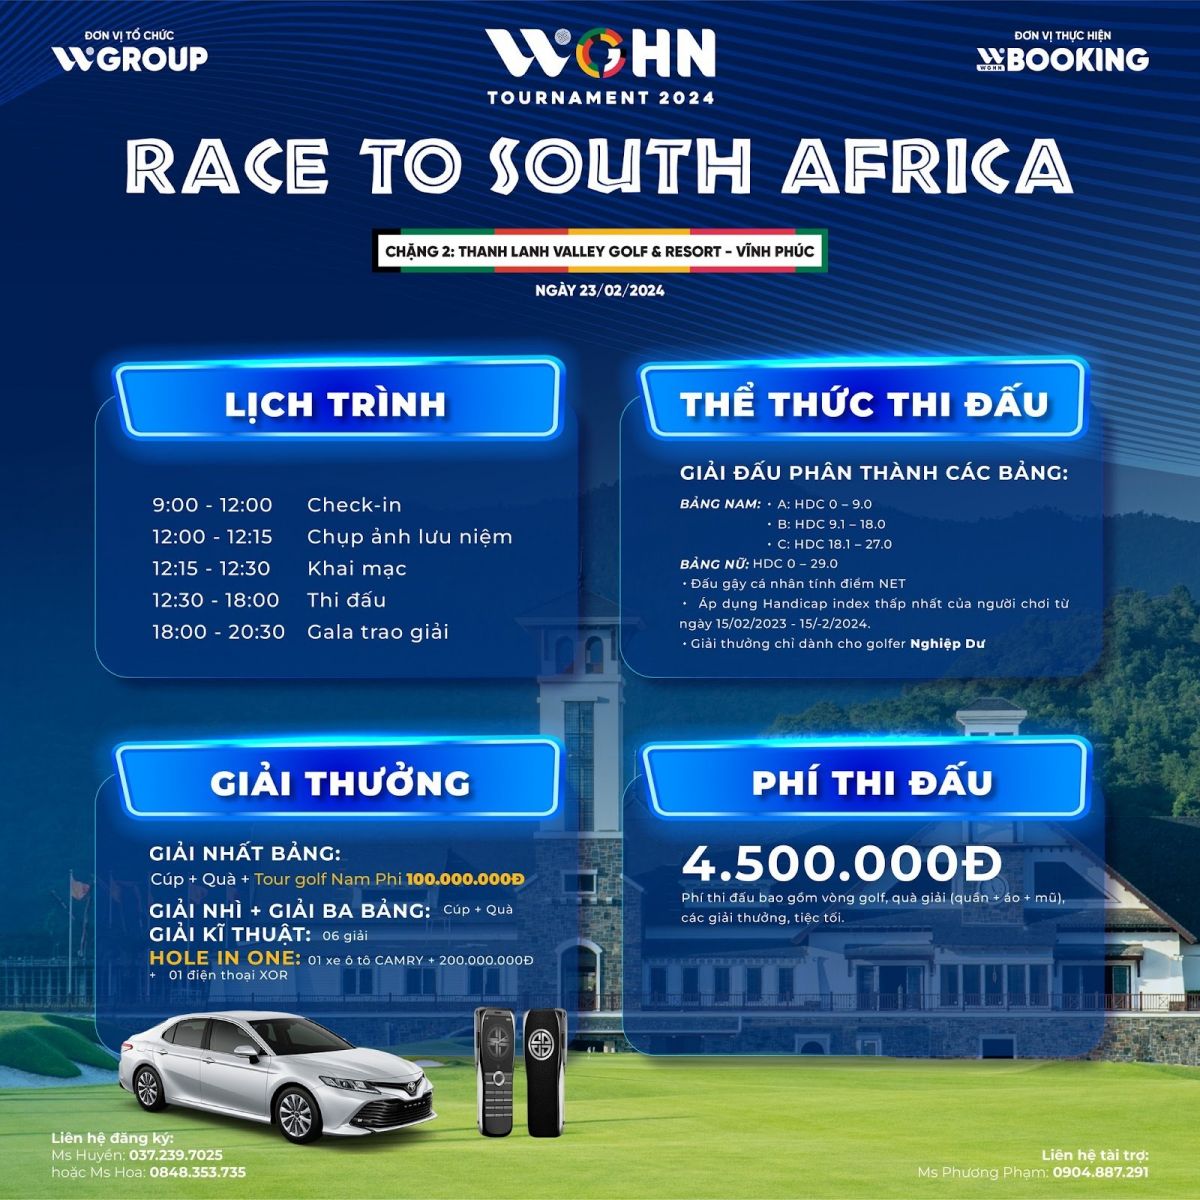 WGHN Tournament Race to South Africa 2024